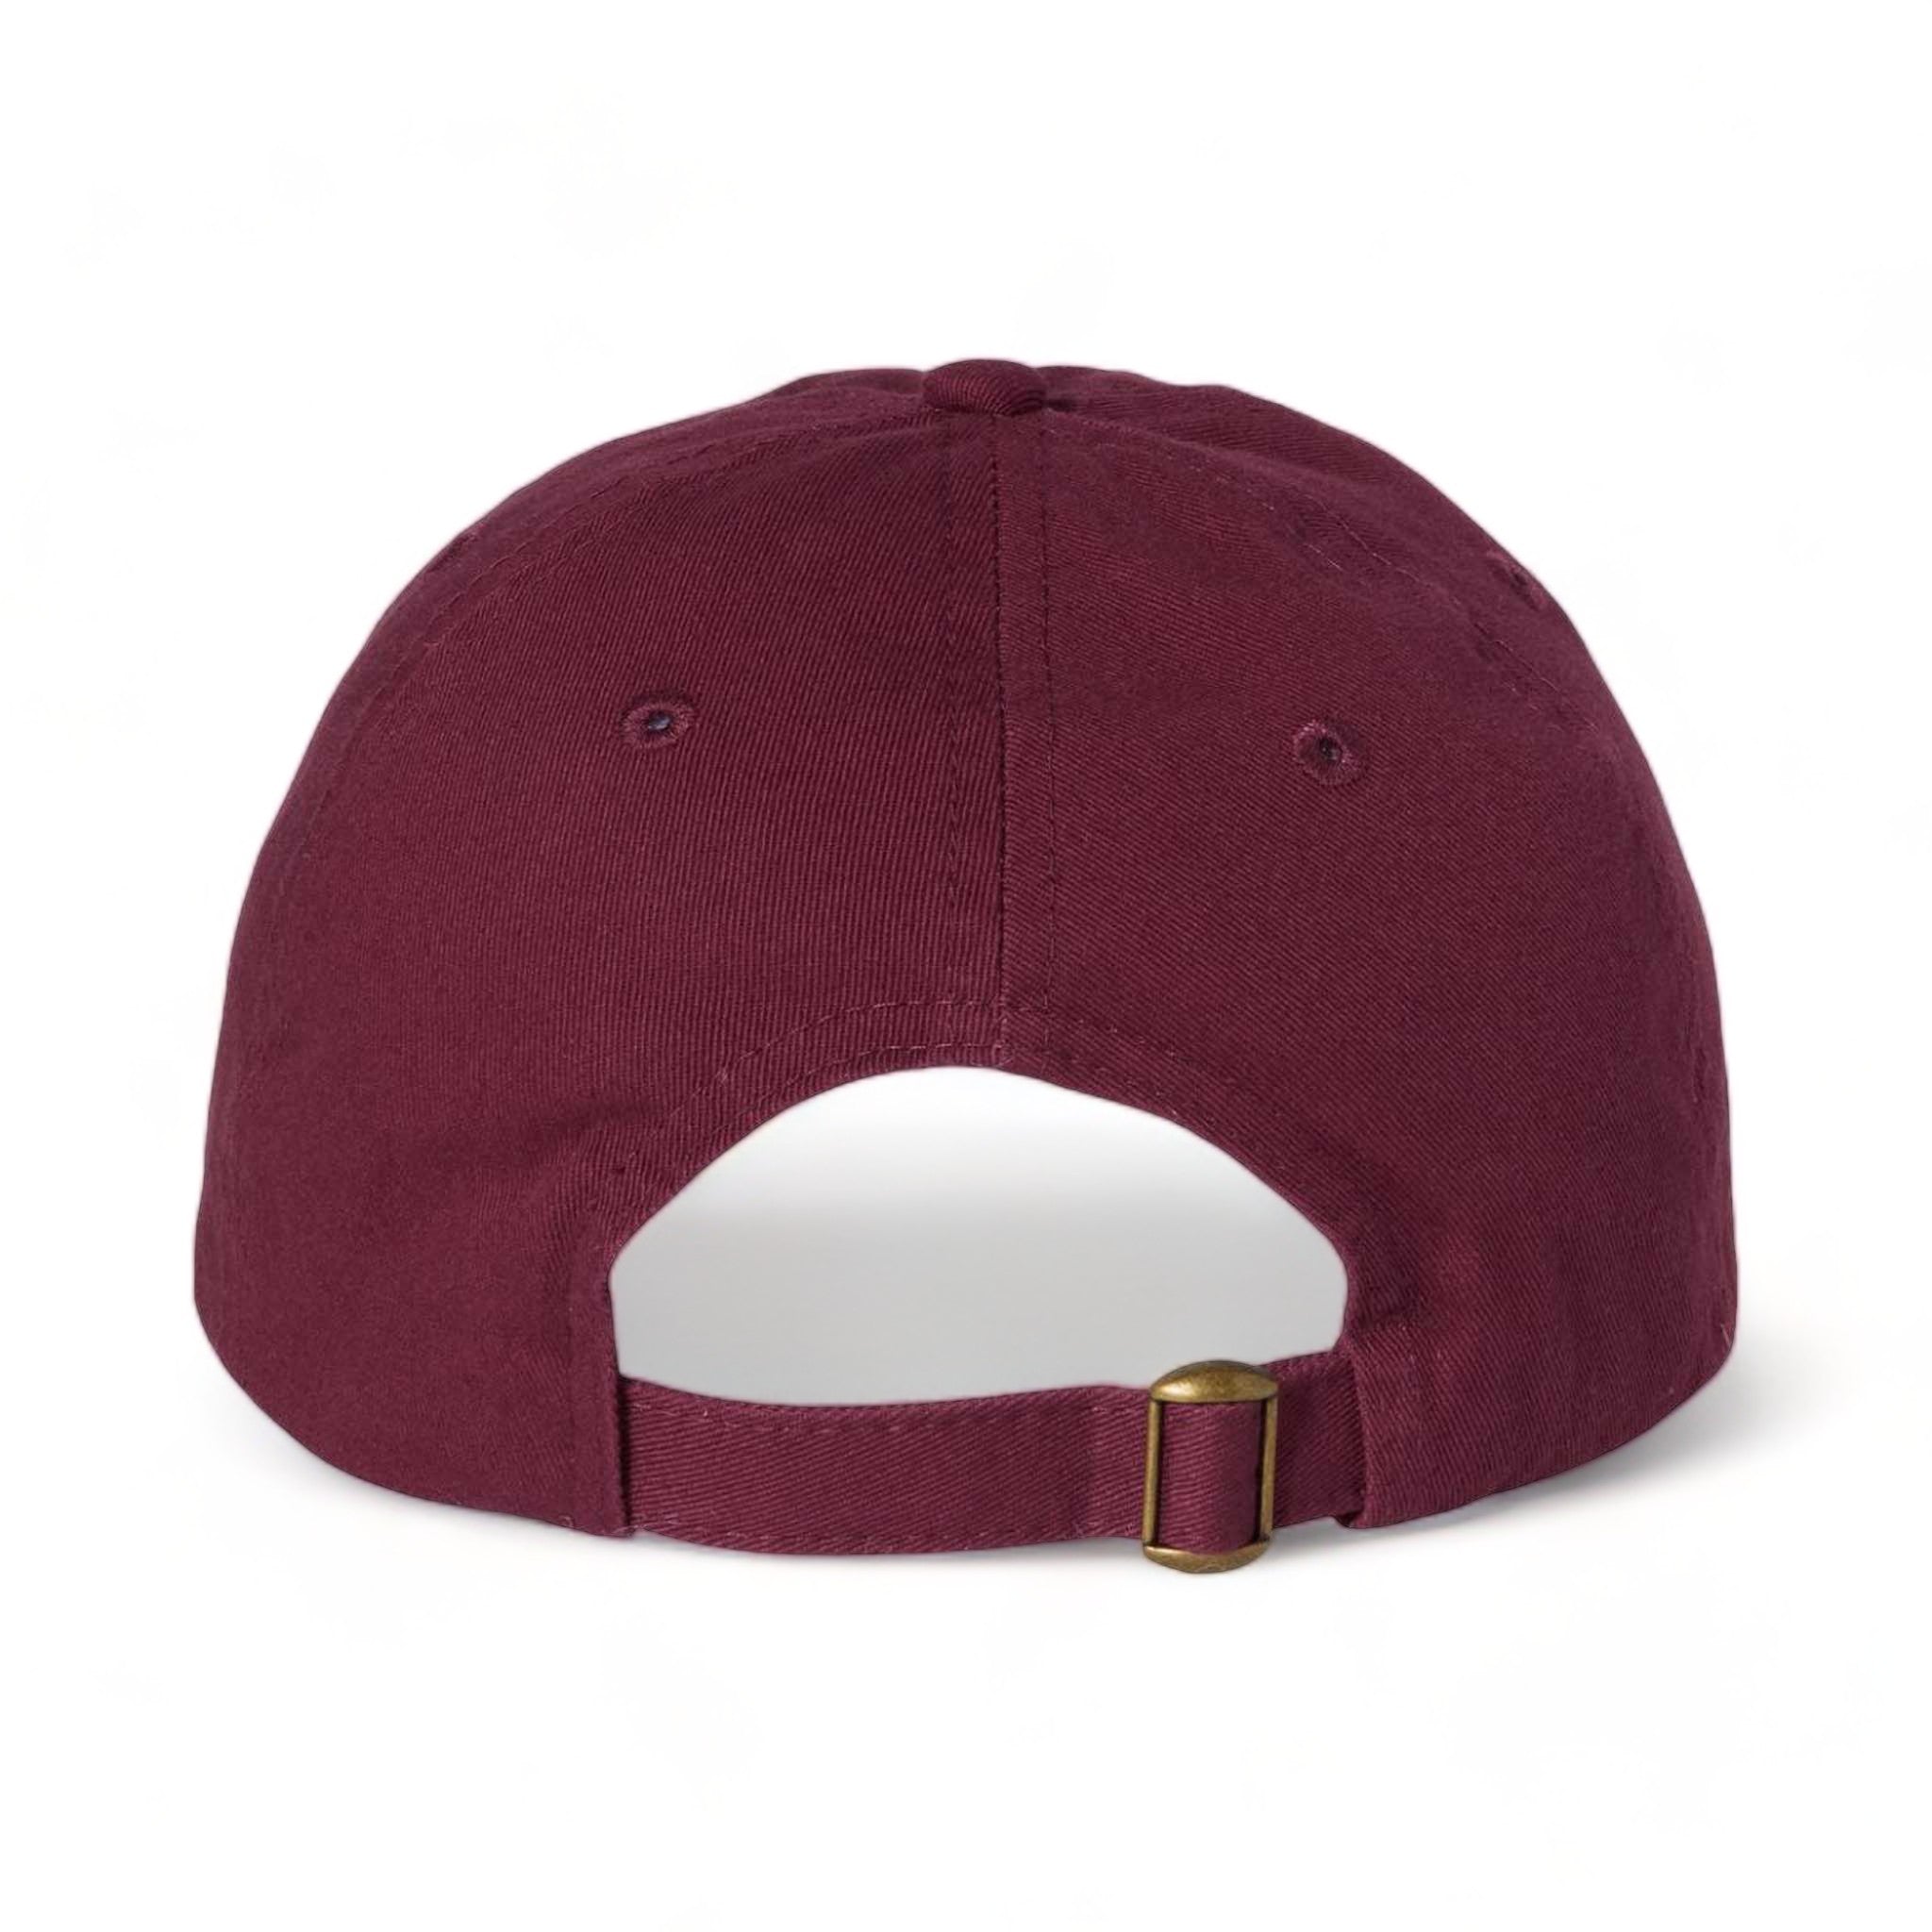 Back view of Valucap VC300A custom hat in maroon